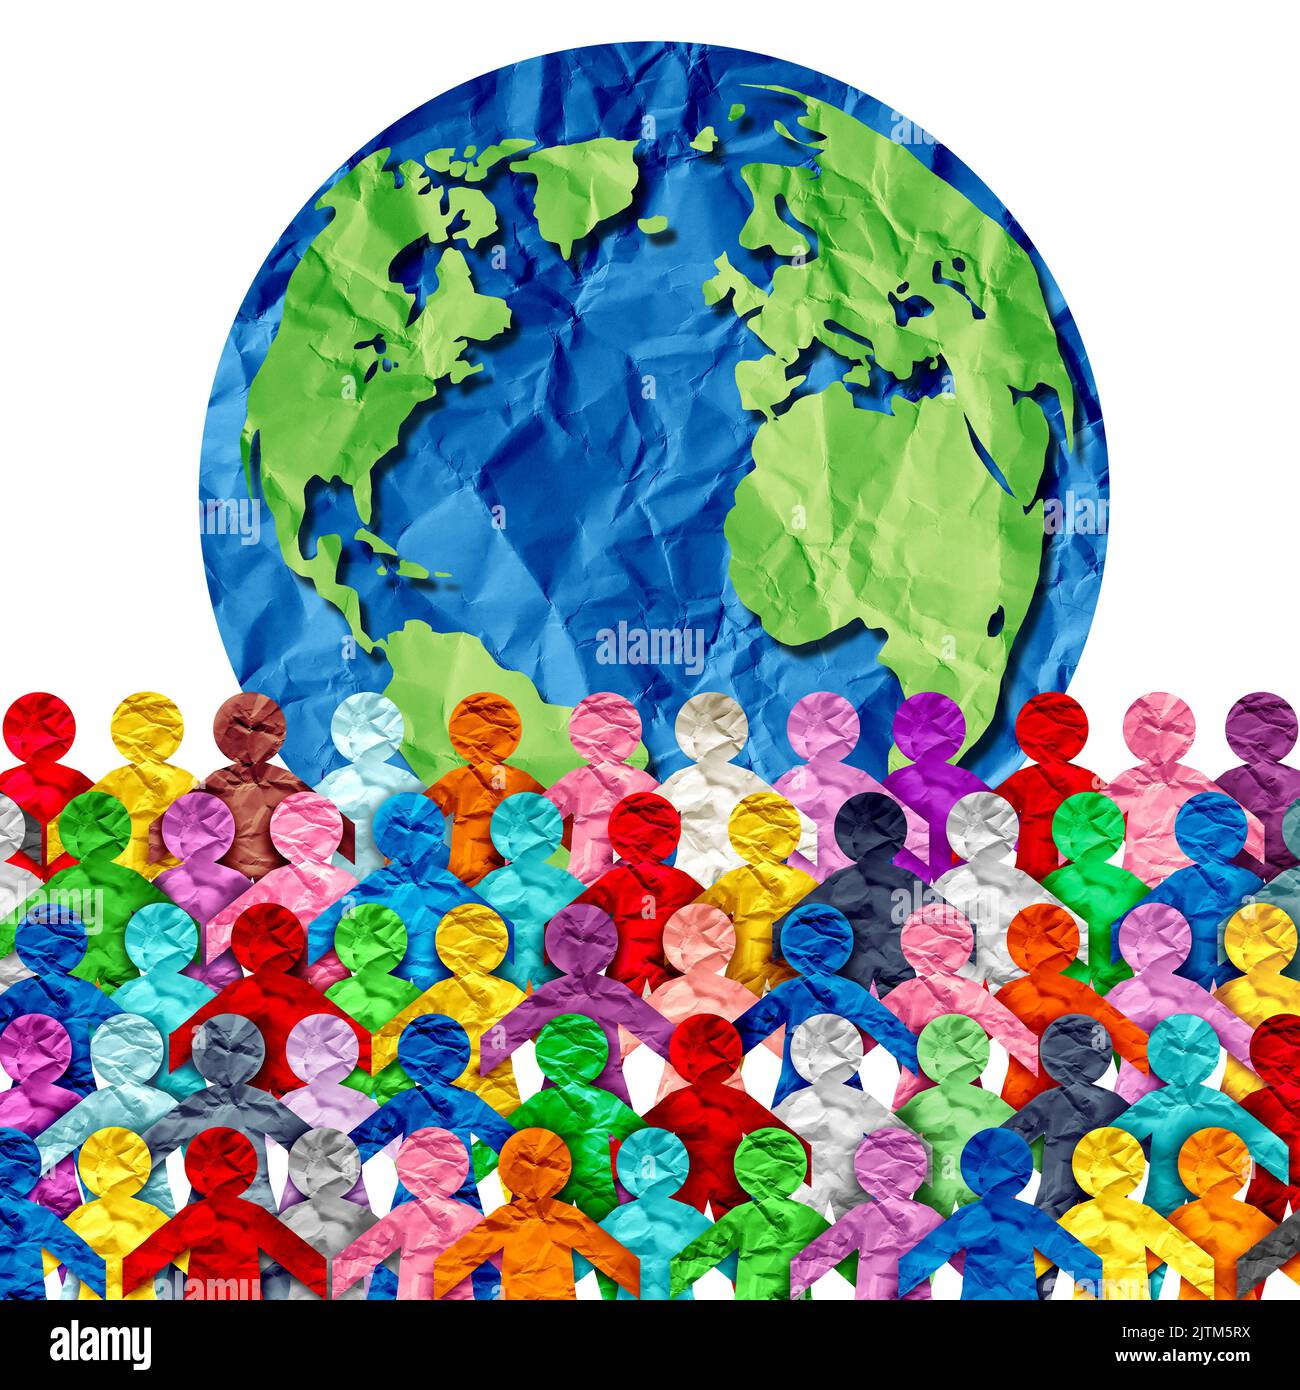 World Employee diversity as diverse cultures and multiculturalism society and international tolerance celebration of global people integration. Stock Photo